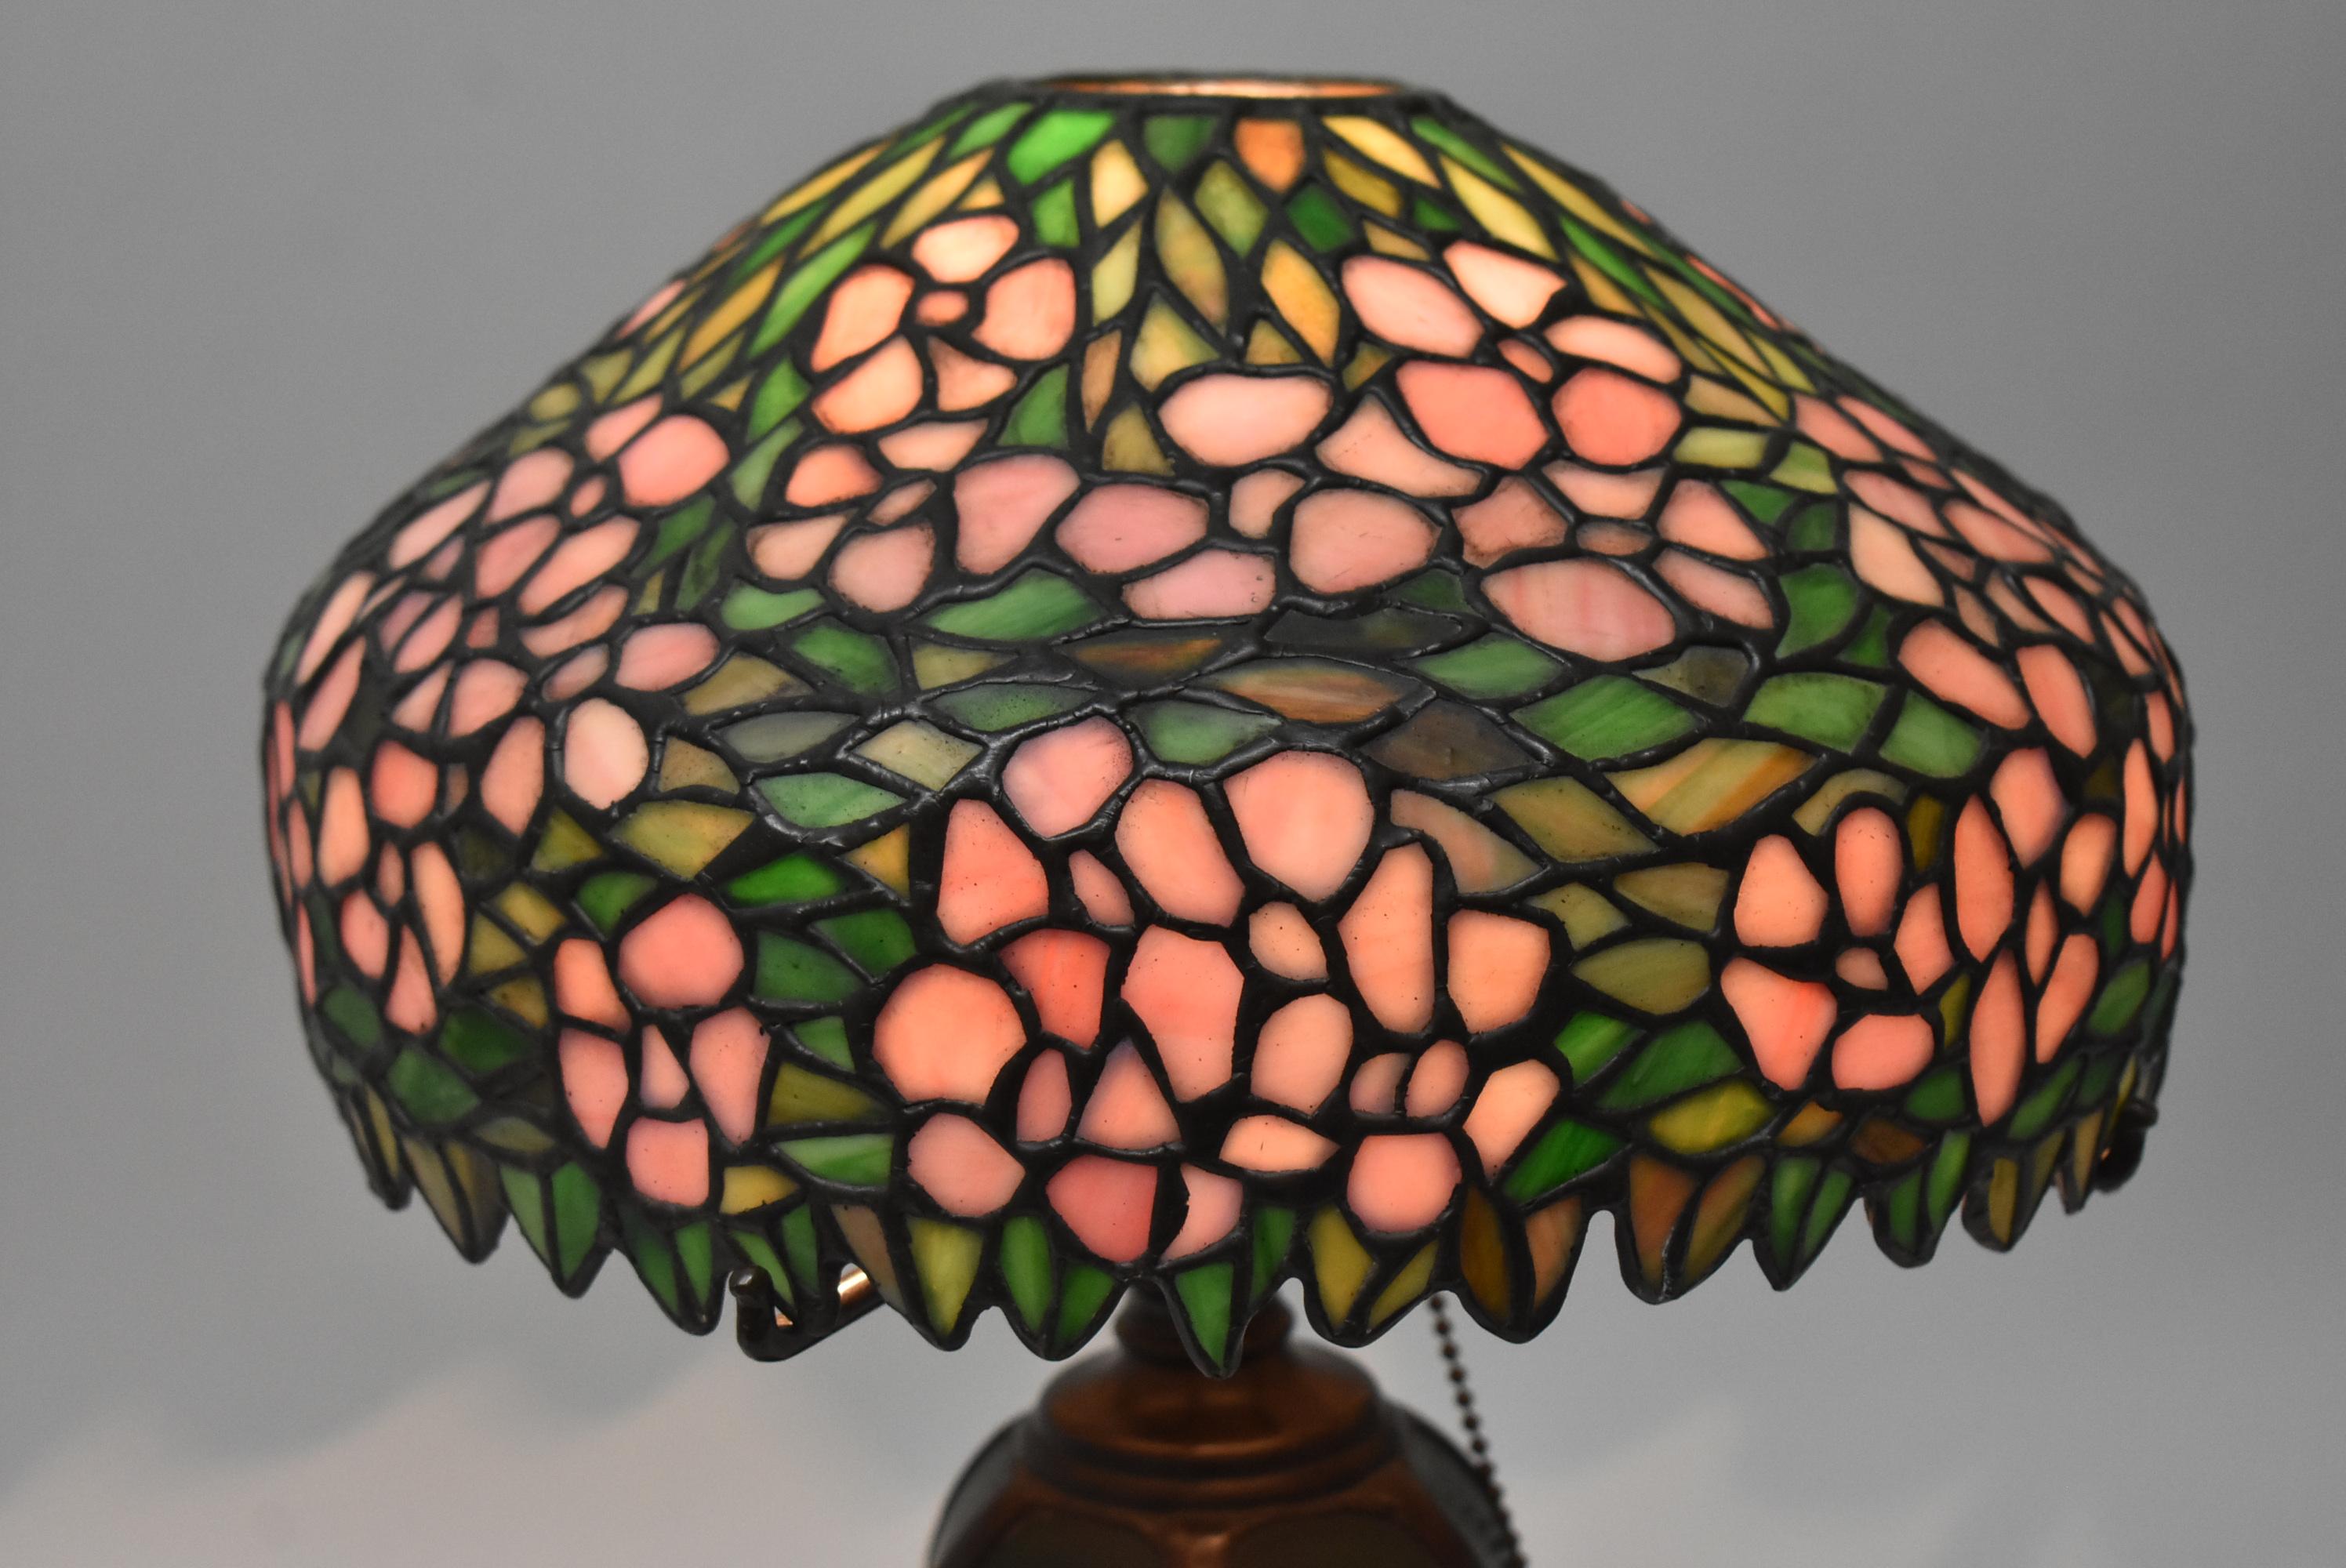 This stunning Handel Cherry Blossom leaded glass lamp is circa 1910. The 12